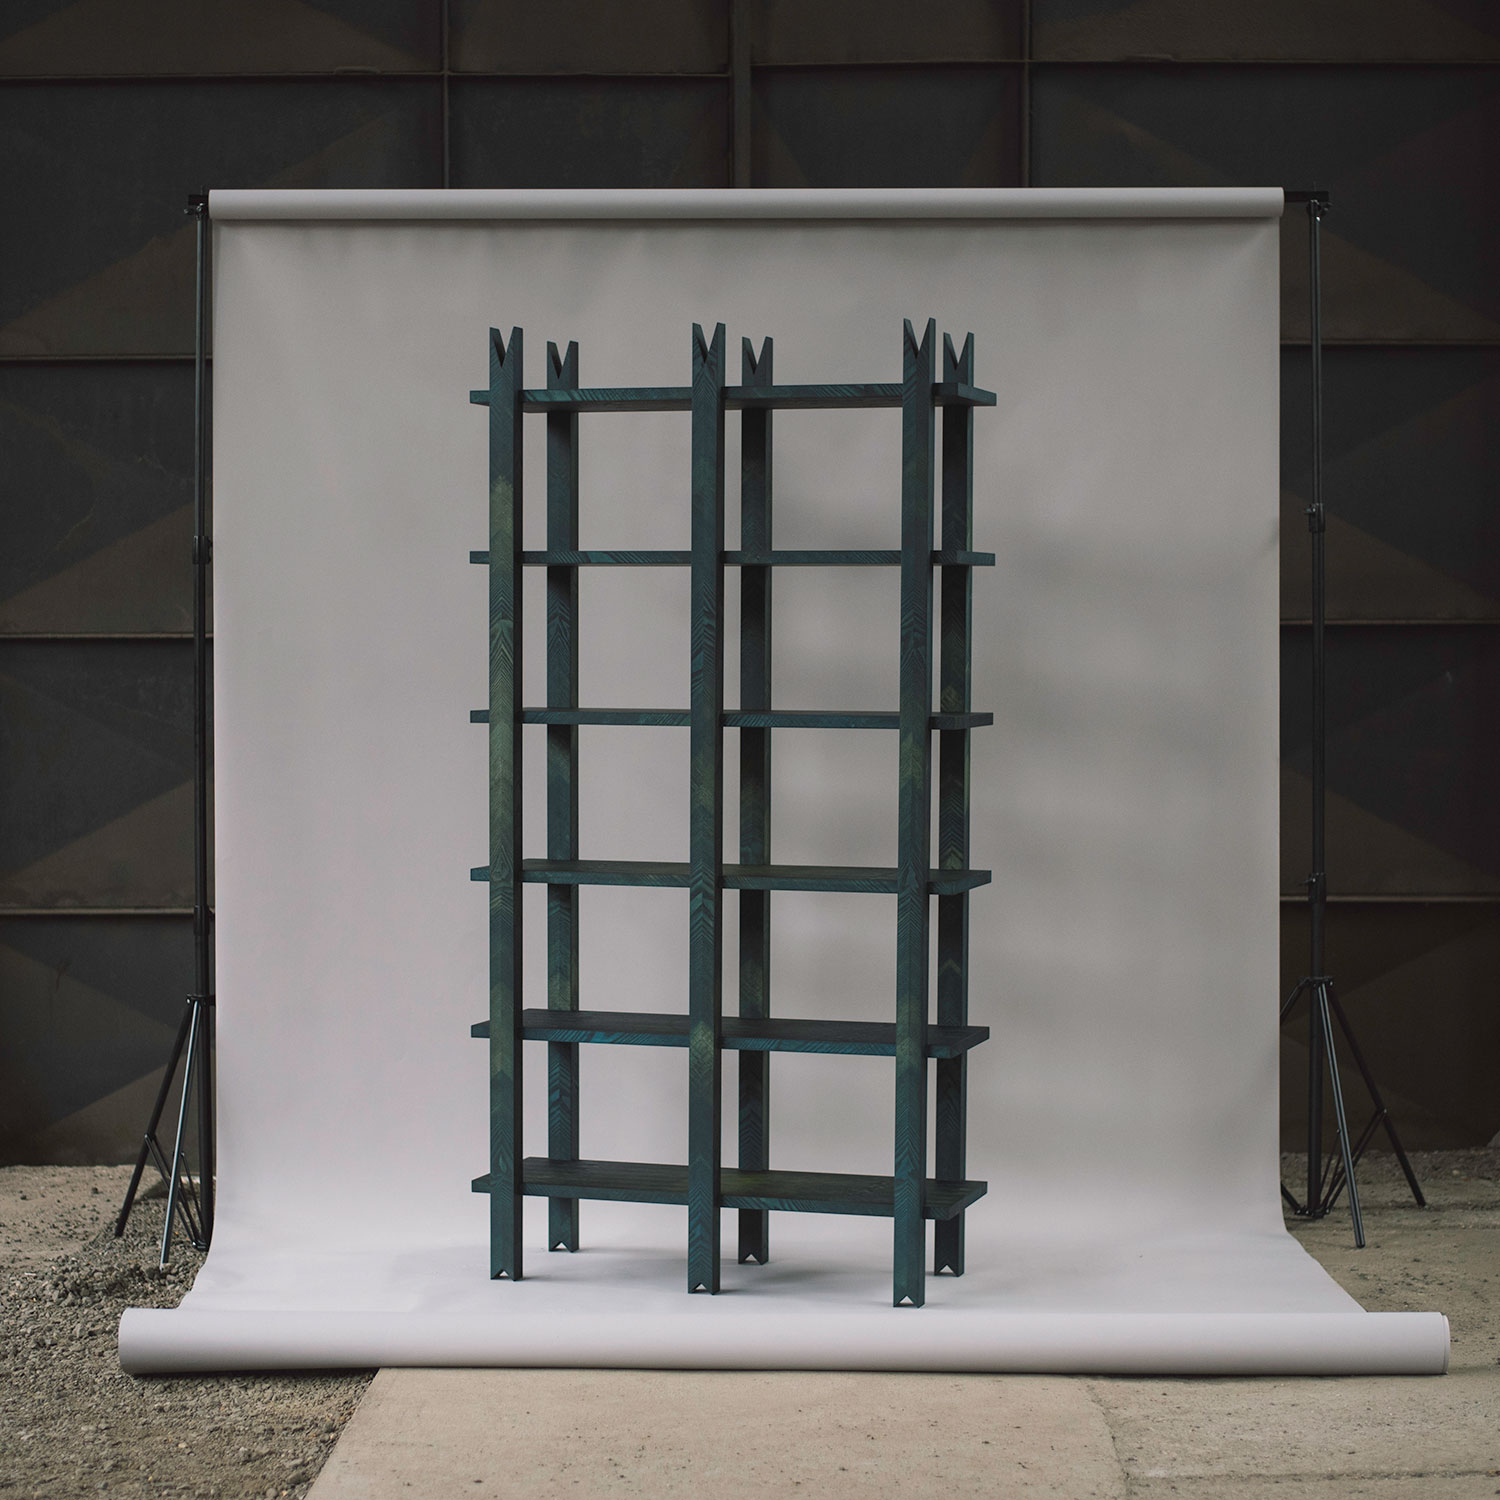 Roots collection for Futuro brand - Inlaid Shelving Unit